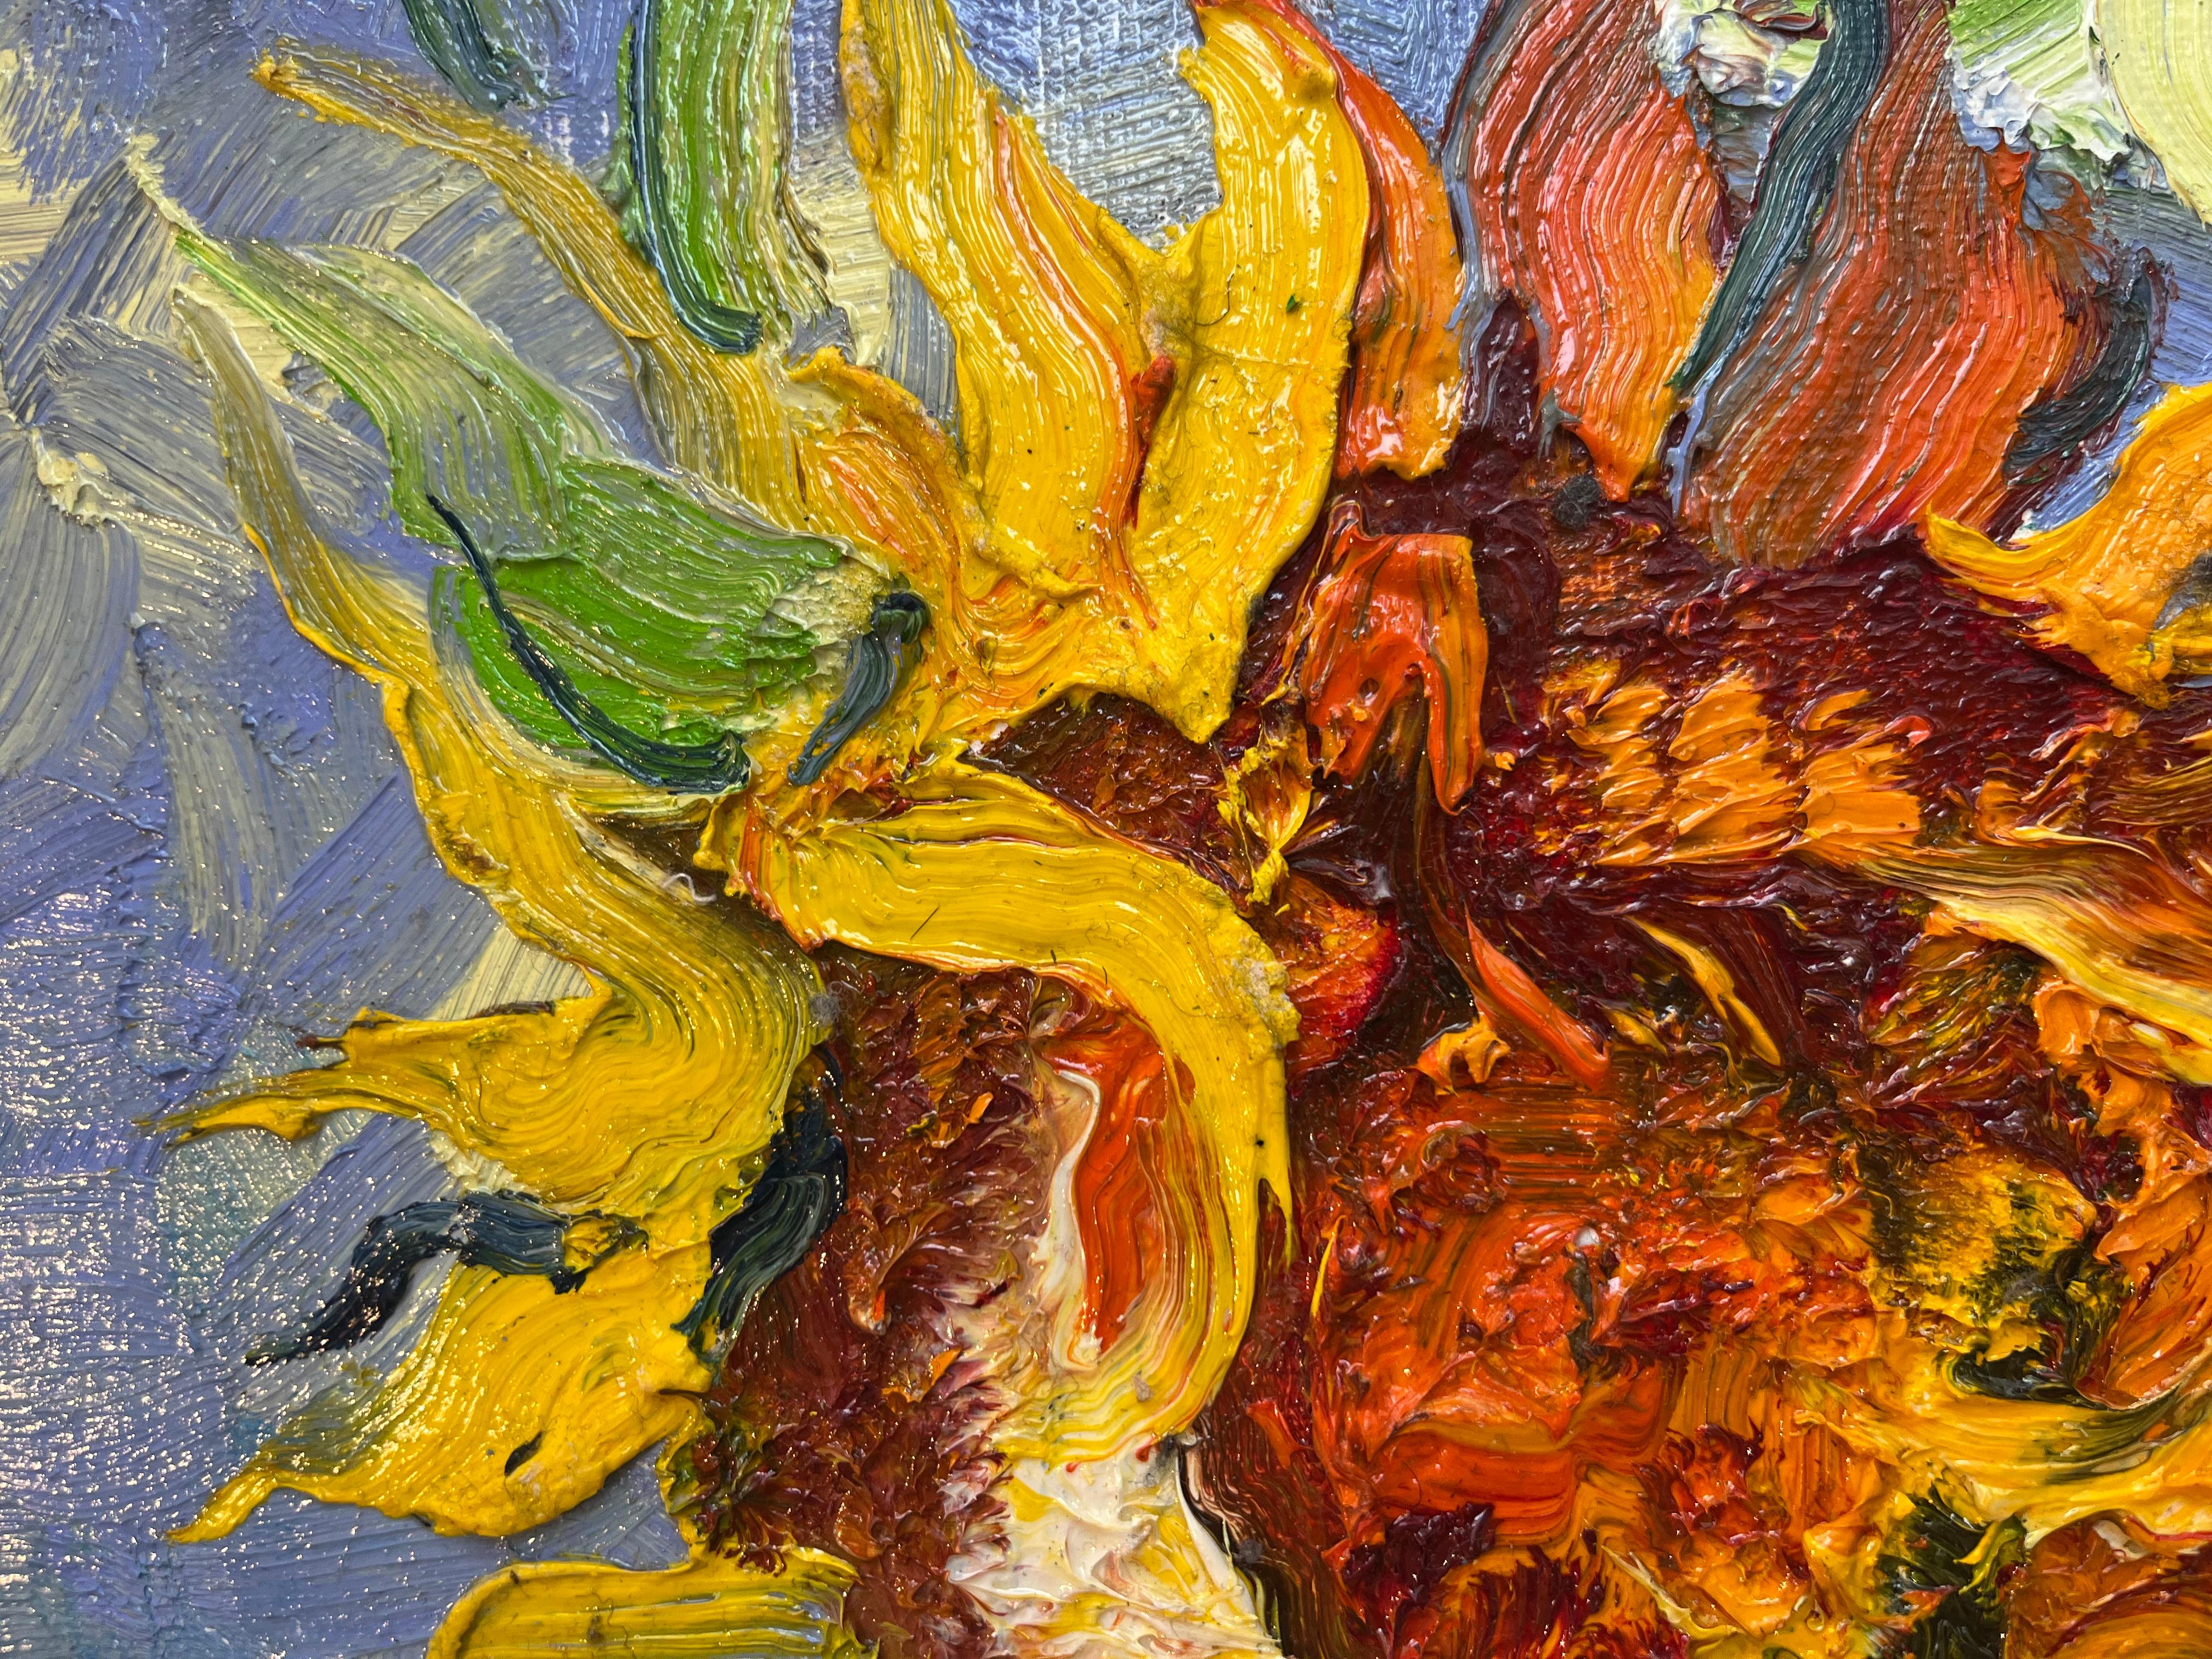 Sunflowers Bouquet-original impressionism still life paintings-contemporary Art - Impressionist Painting by Denis Ribas 